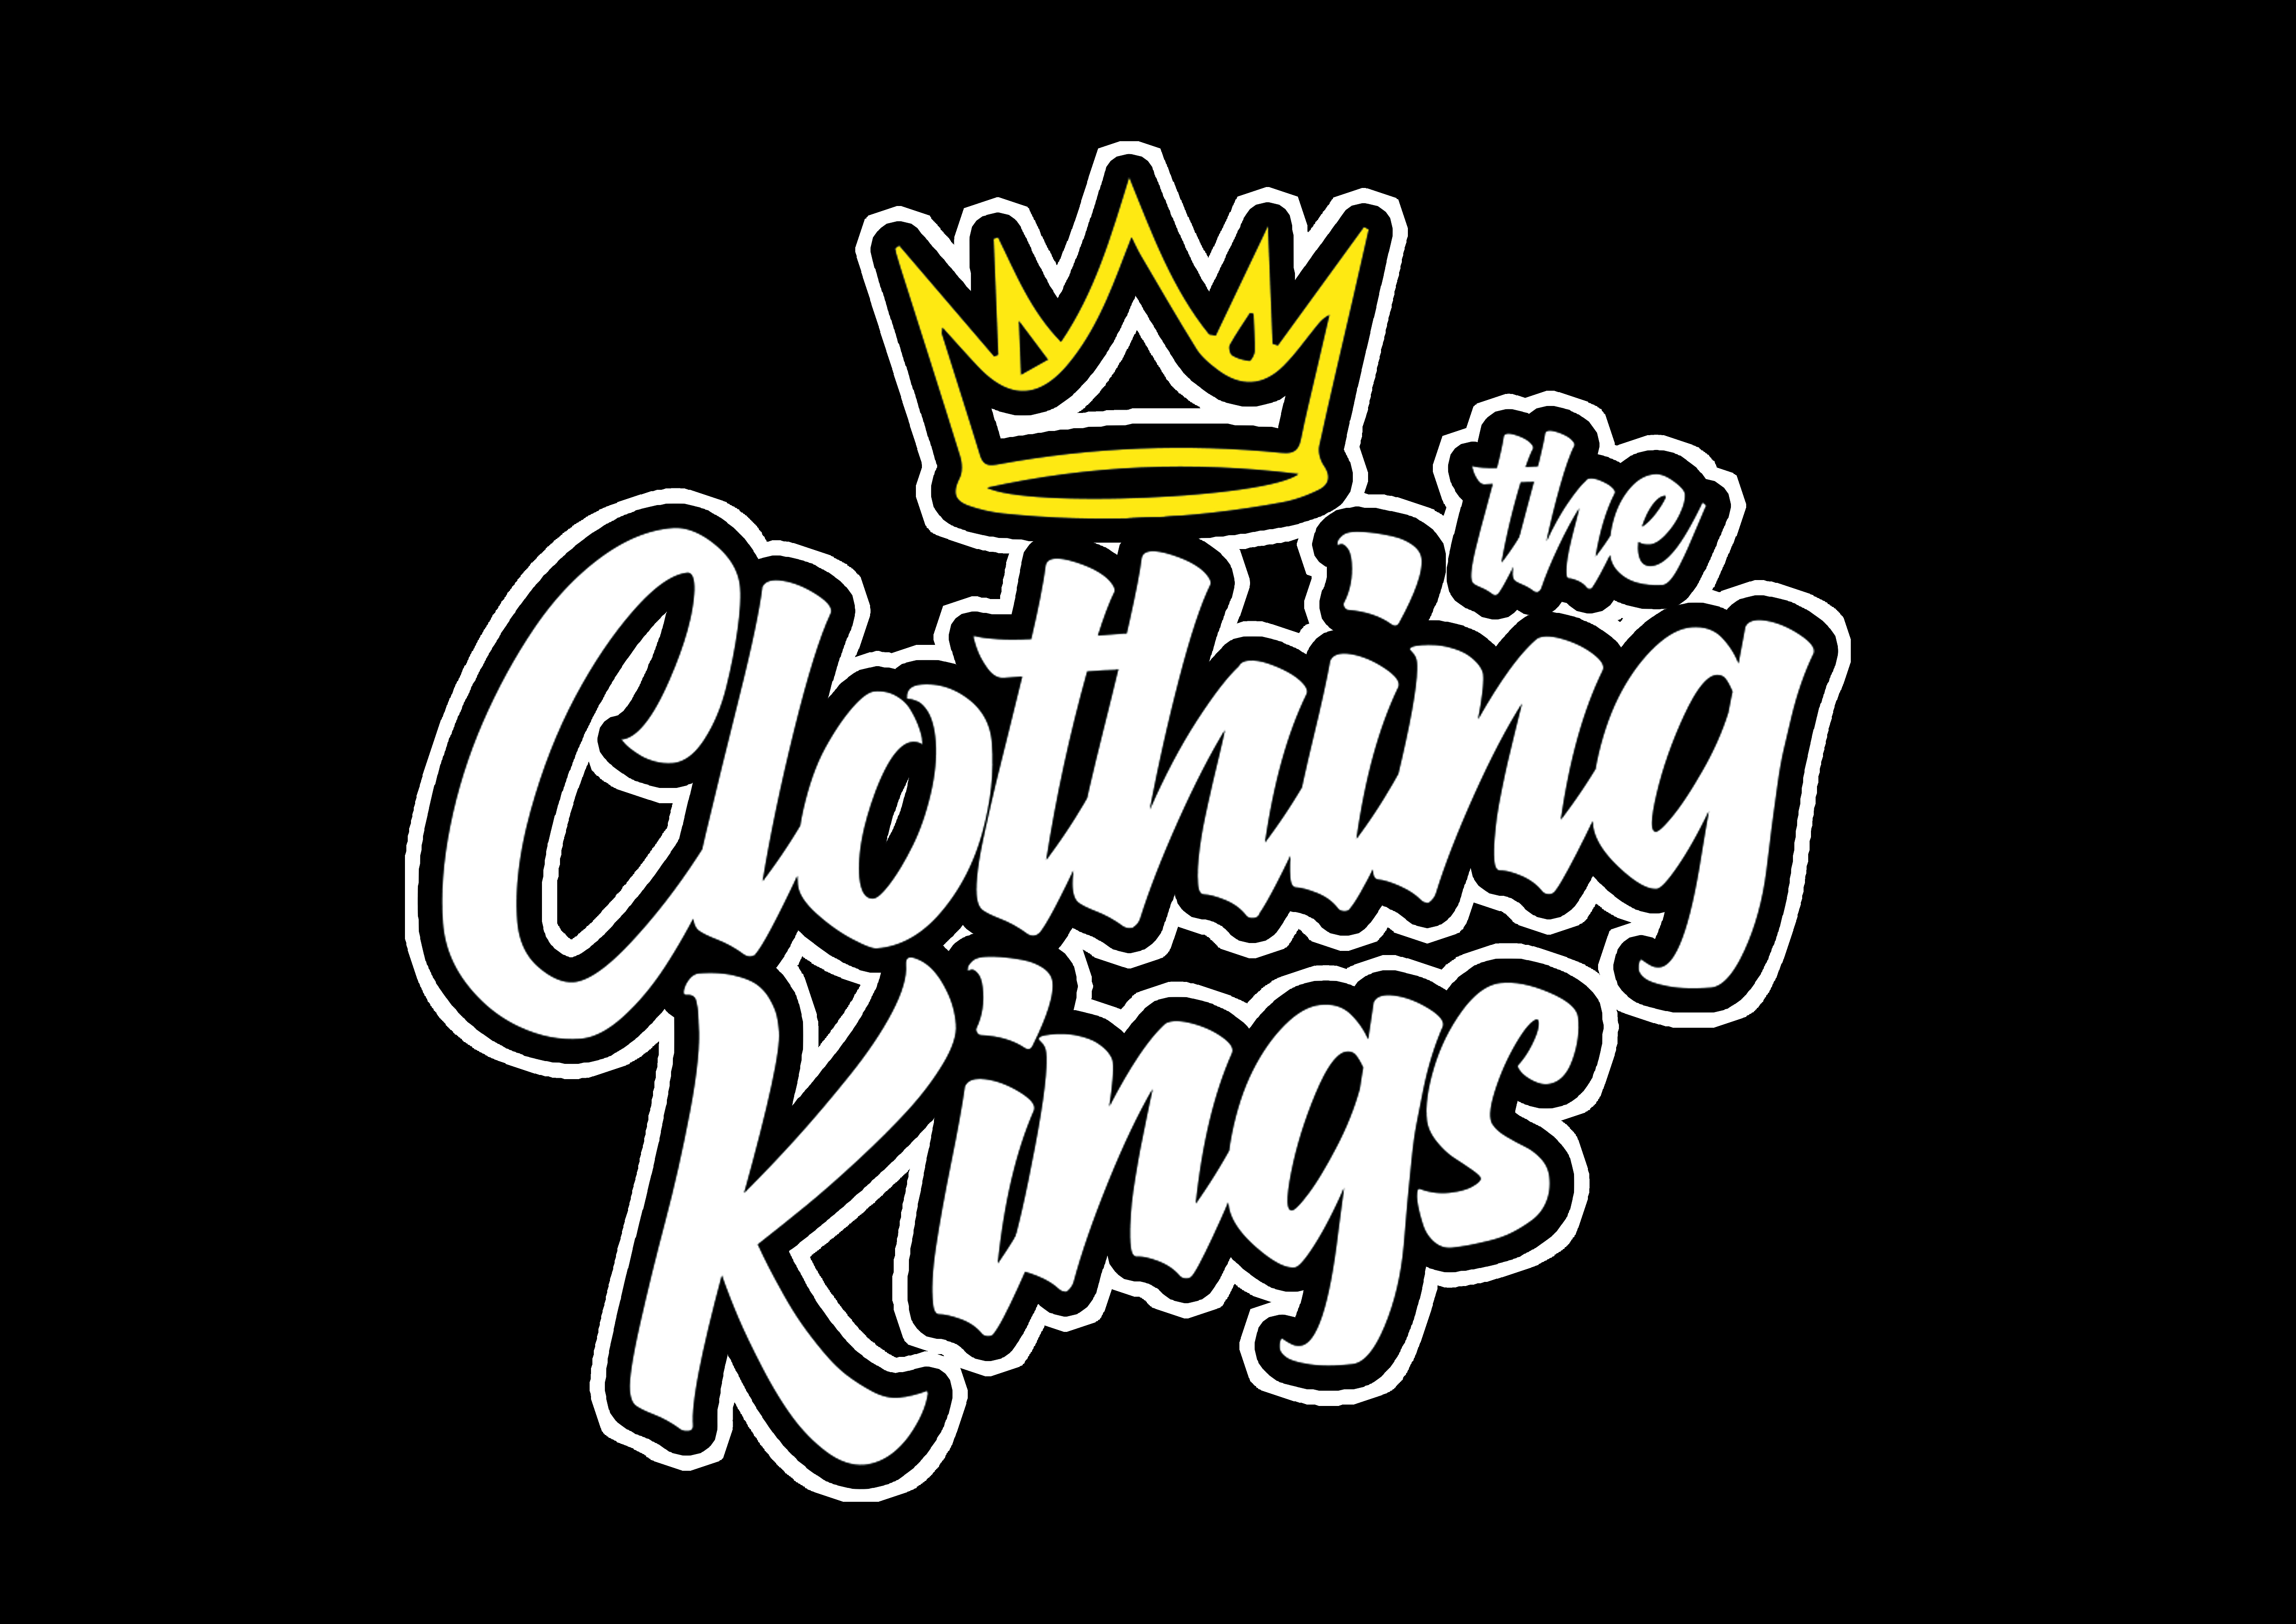 The Clothing Kings